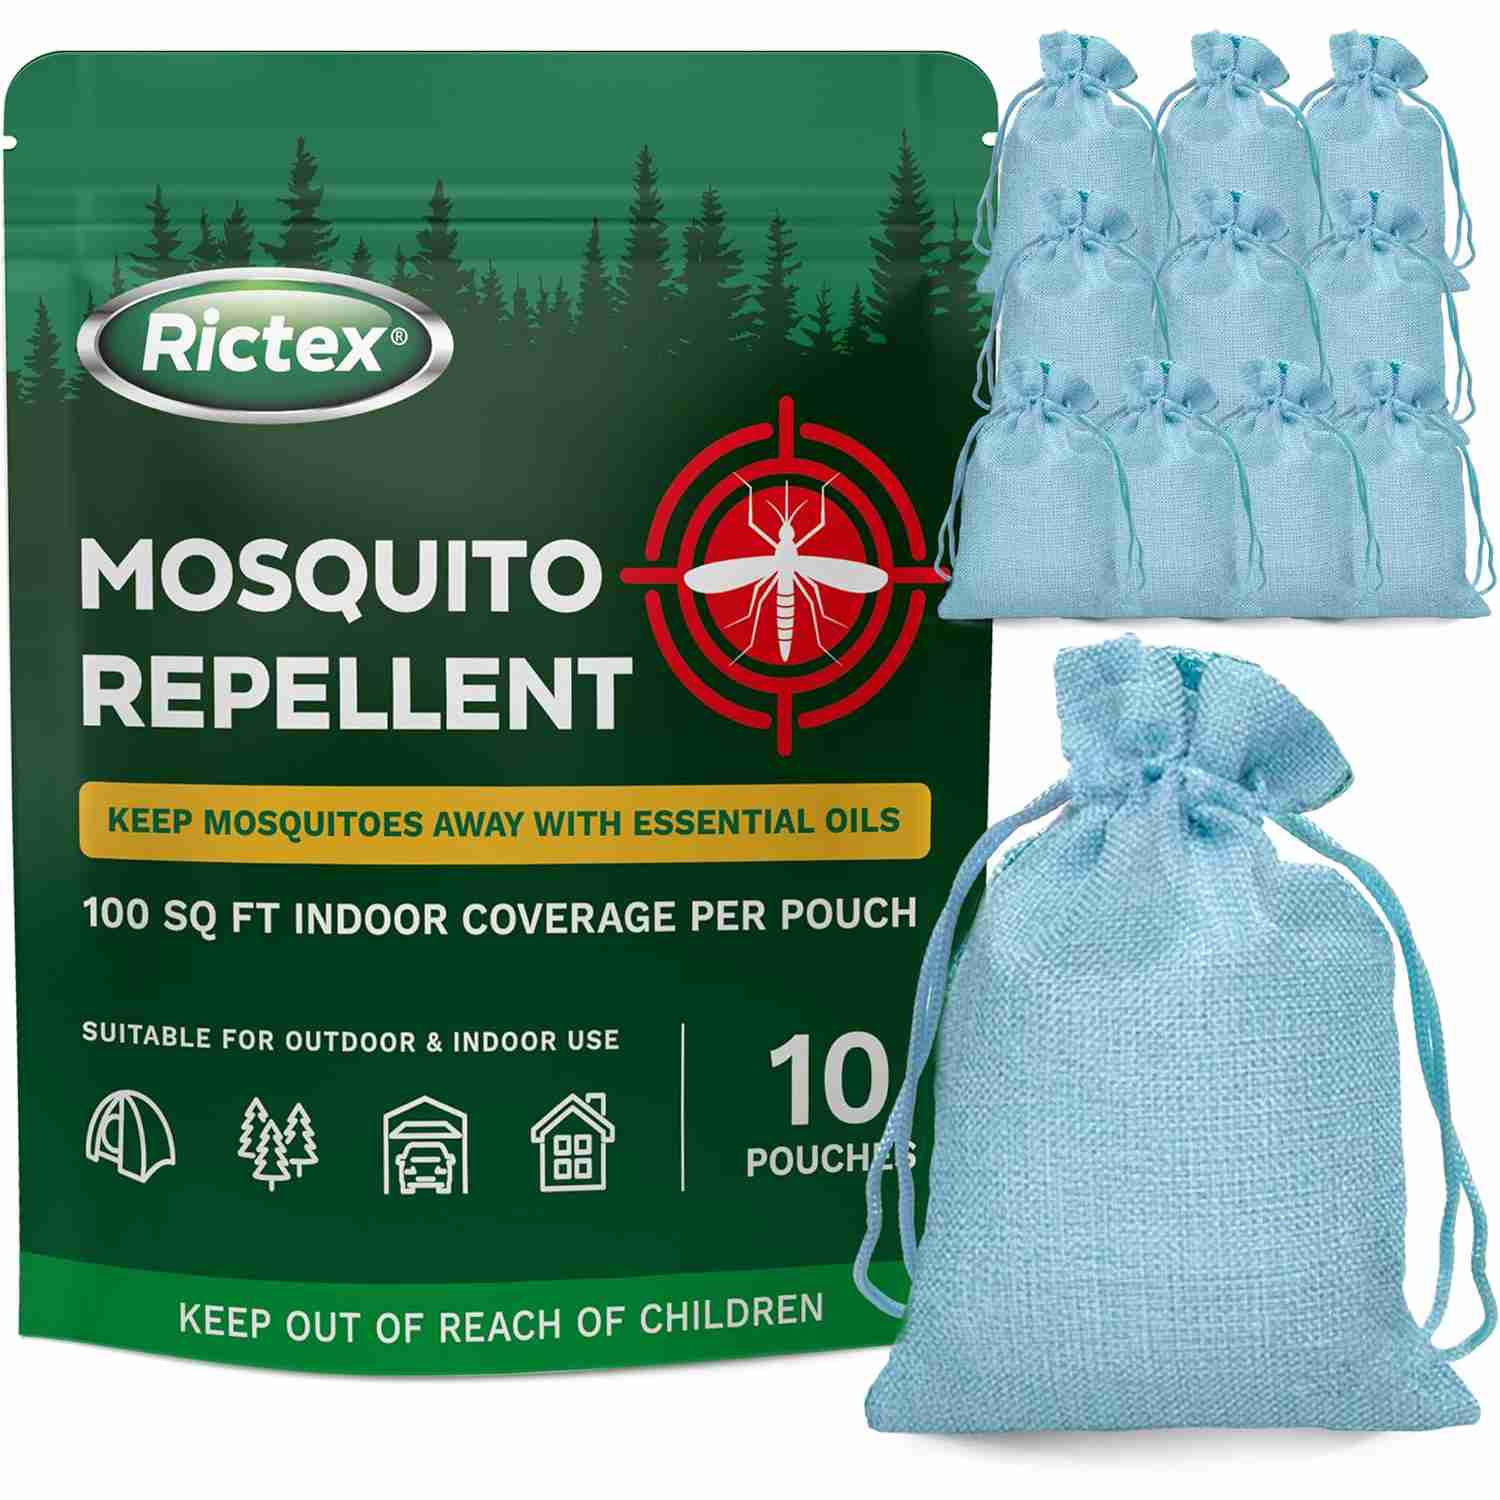 mosquitoes-repellent with cash back rebate